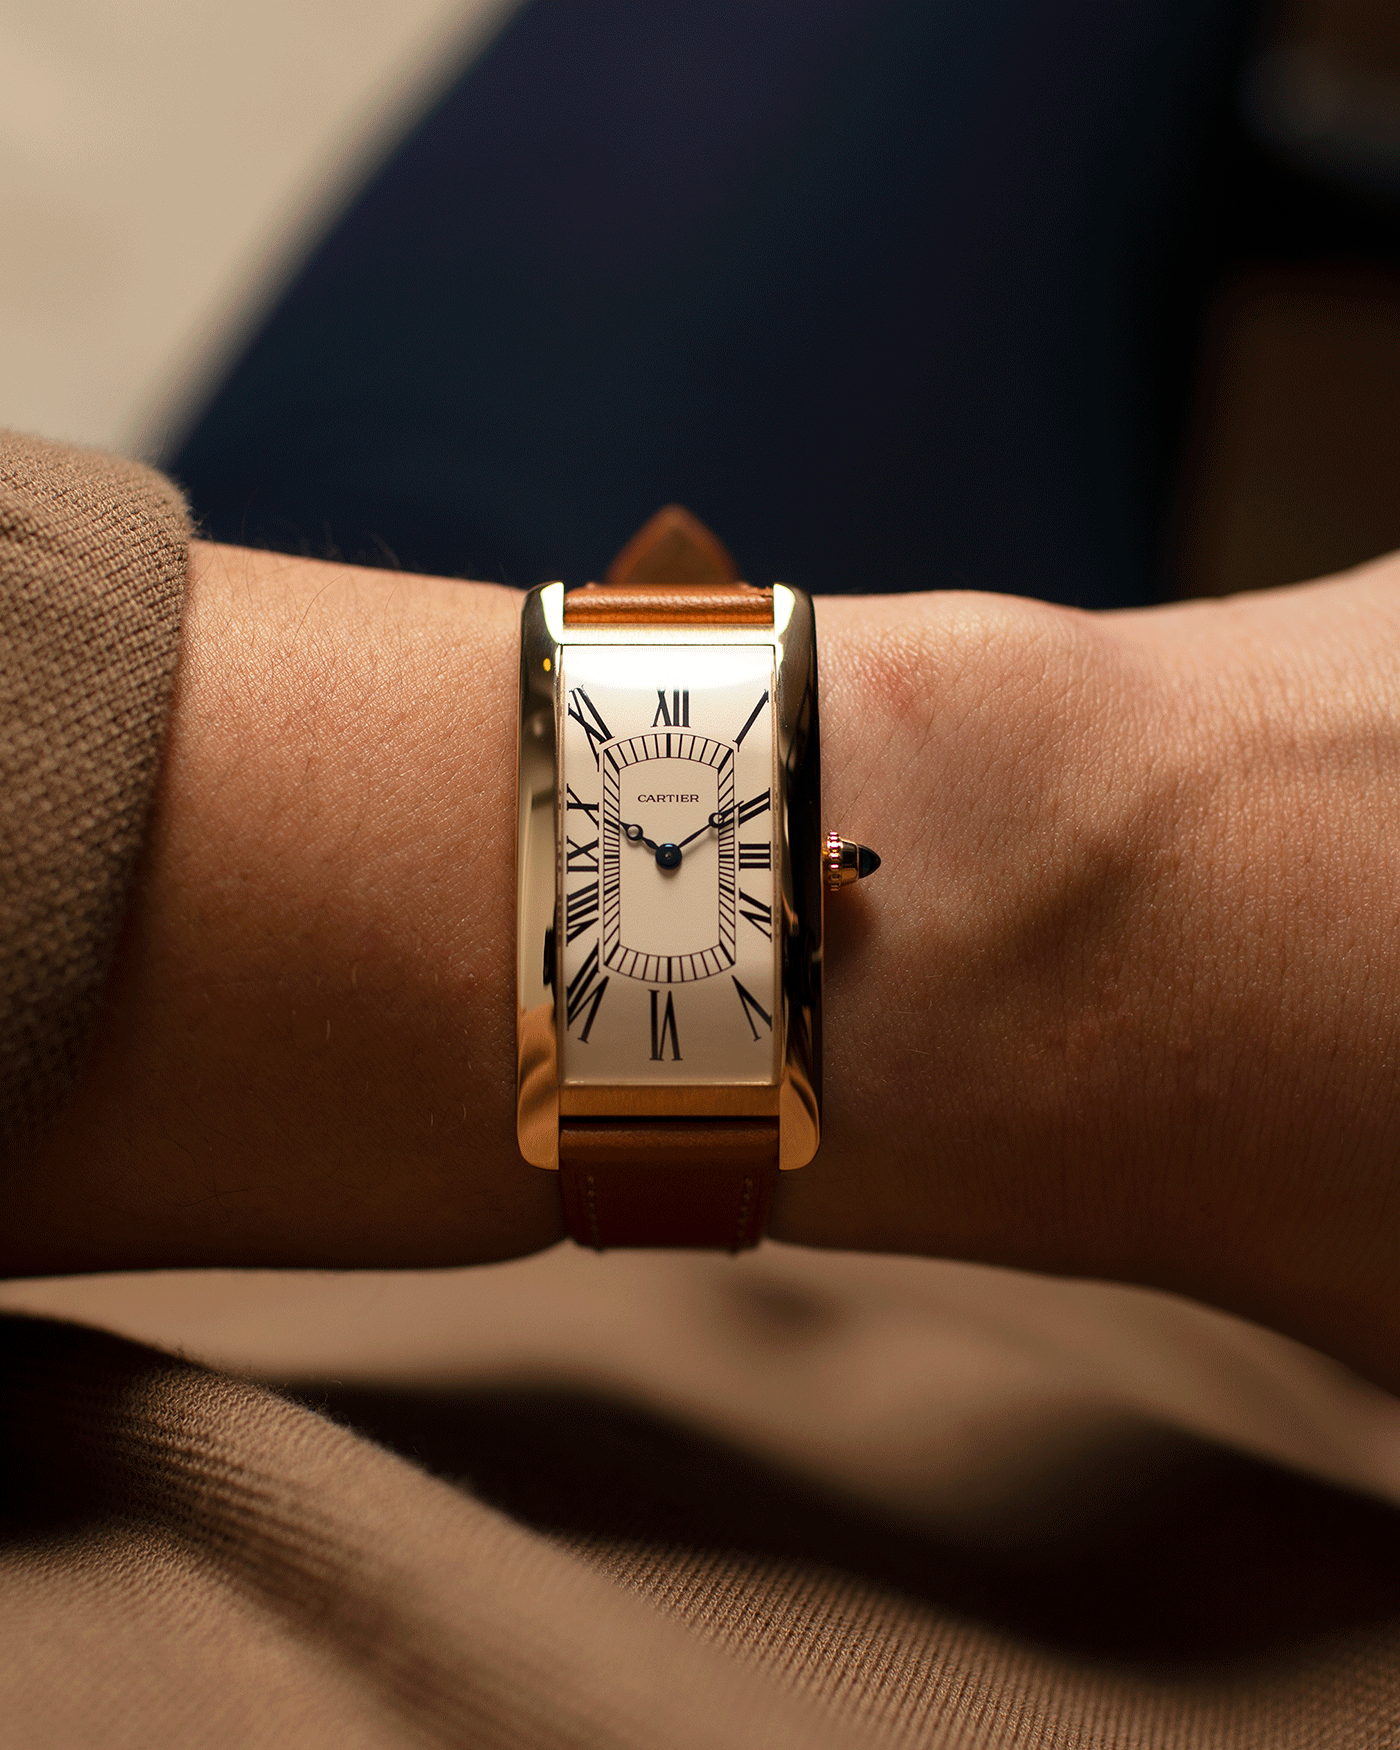 Brand: Cartier Year: 2021 Model: Tank Cintree Reference: 2718 Material: 18k Yellow Gold Movement: Jaeger Le Coultre manual wind caliber 9780MC Case Diameter: 46 x 23 mm, 6.4mm thick Strap: Cartier Chestnut Brown Leather Strap and 18k Yellow Gold Tang Buckle